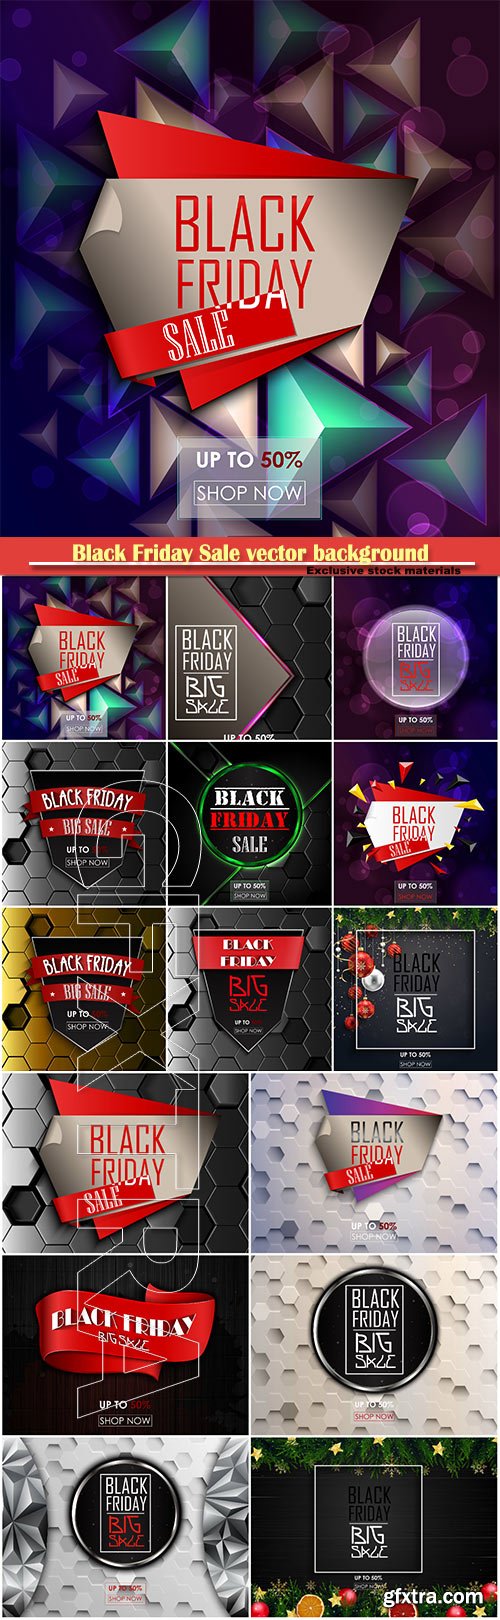 Black Friday Sale vector background, shopping offer and promotion